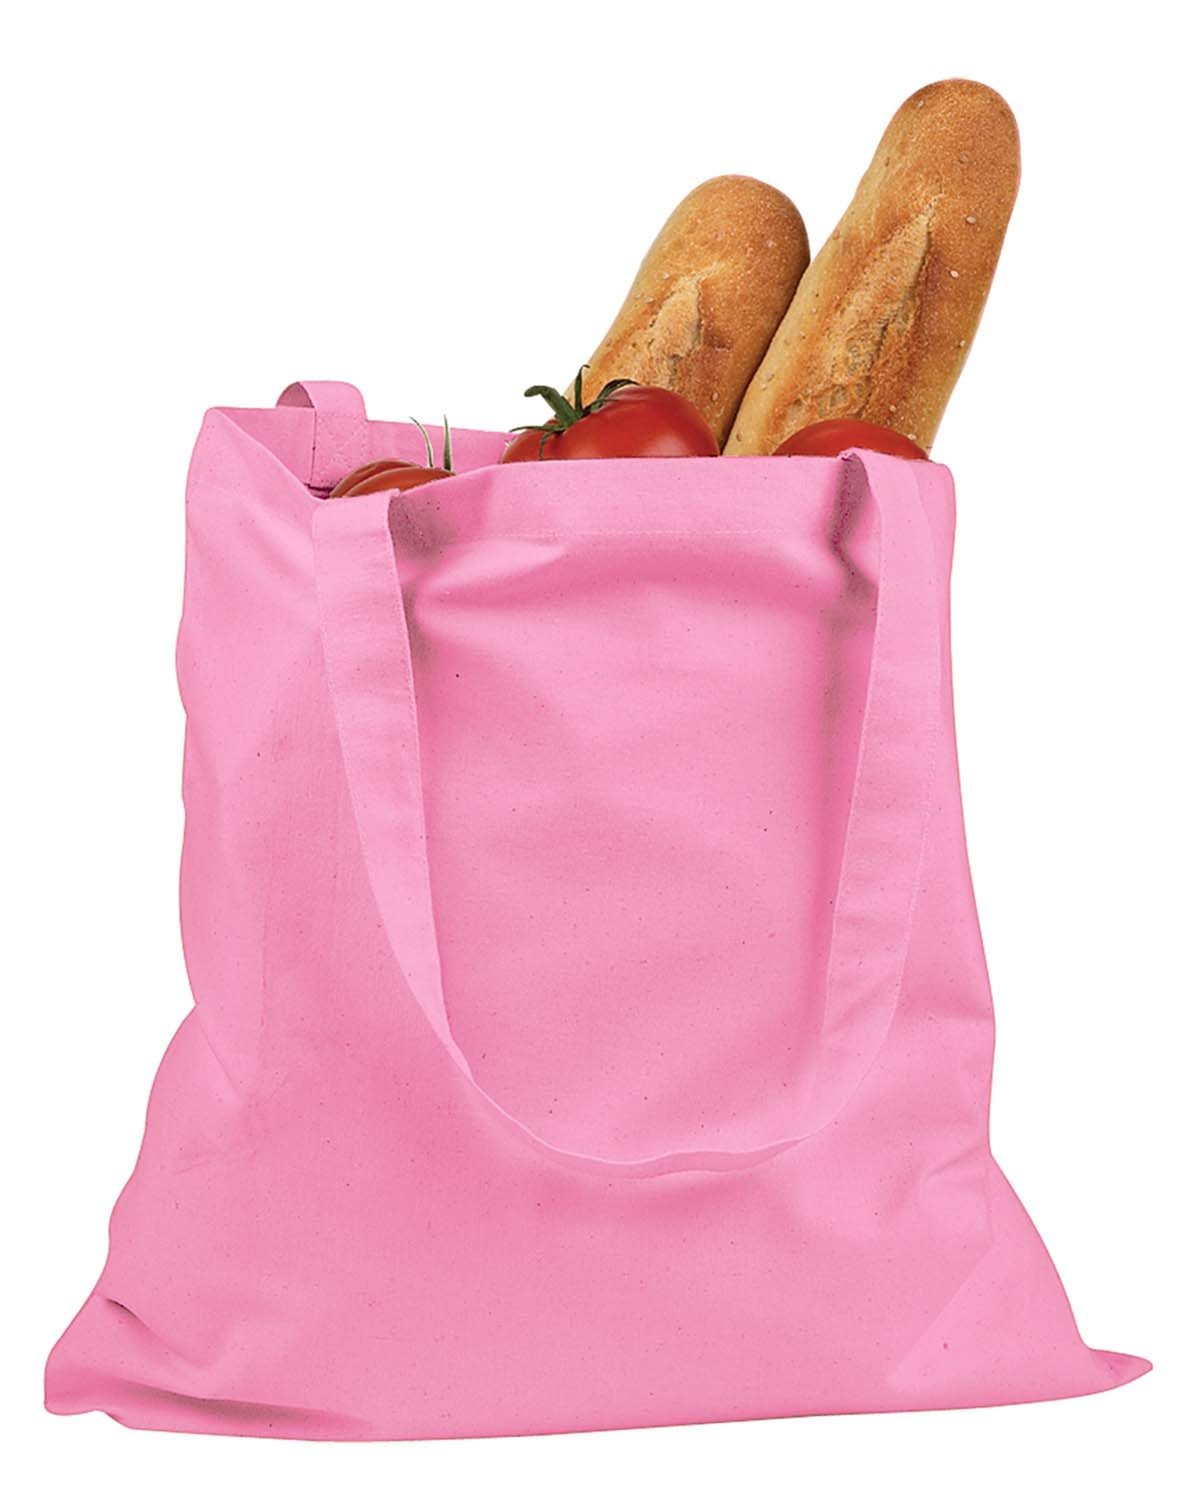 Pink tote pictured.